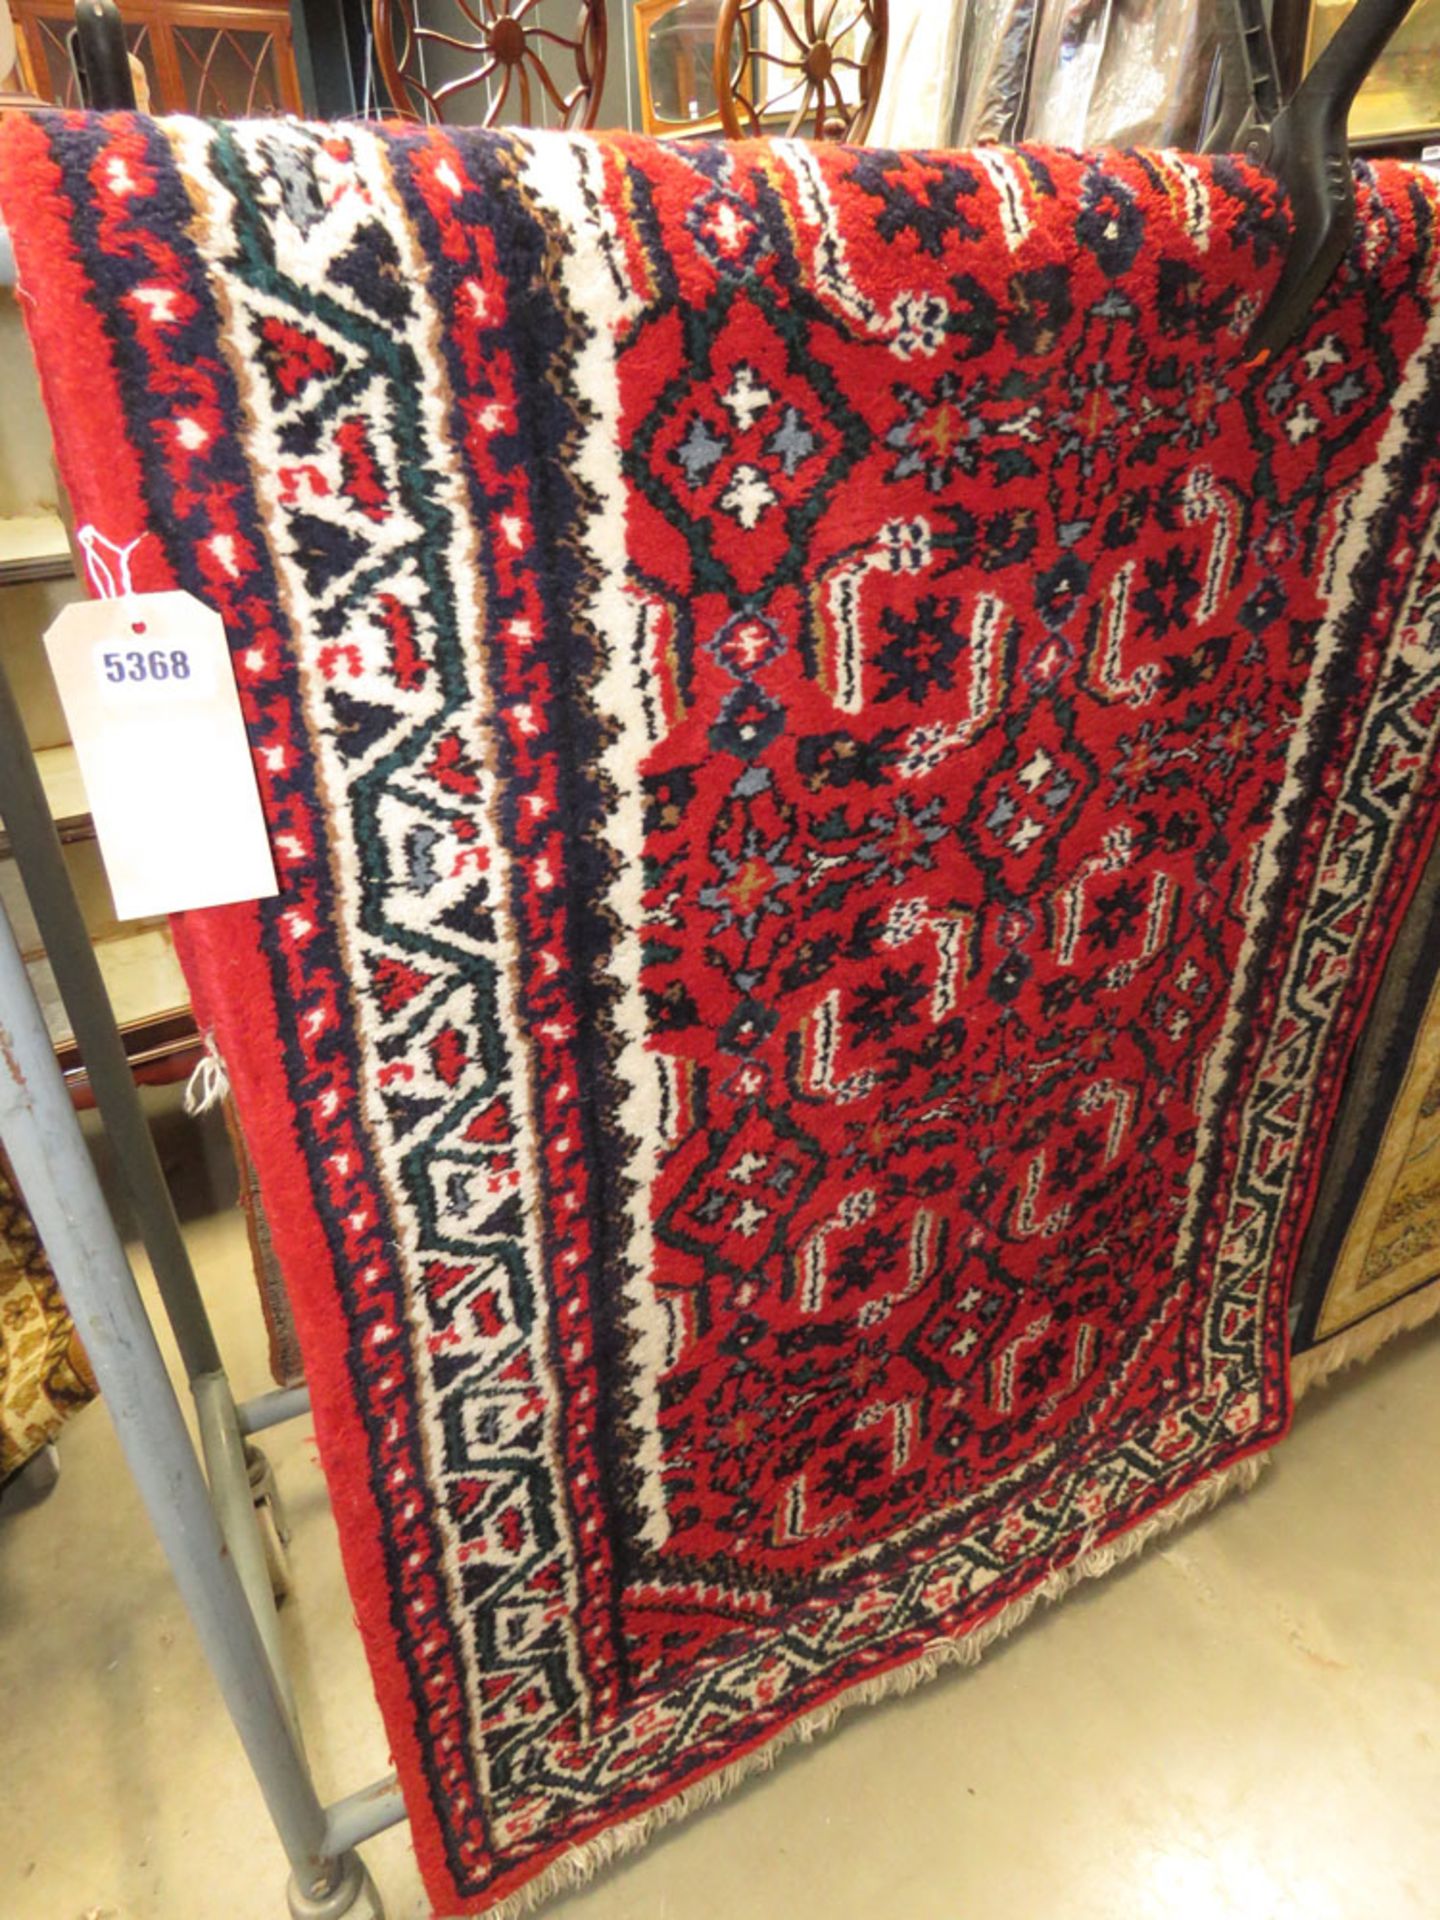 (3) Woolen Moroccan mat with floral pattern